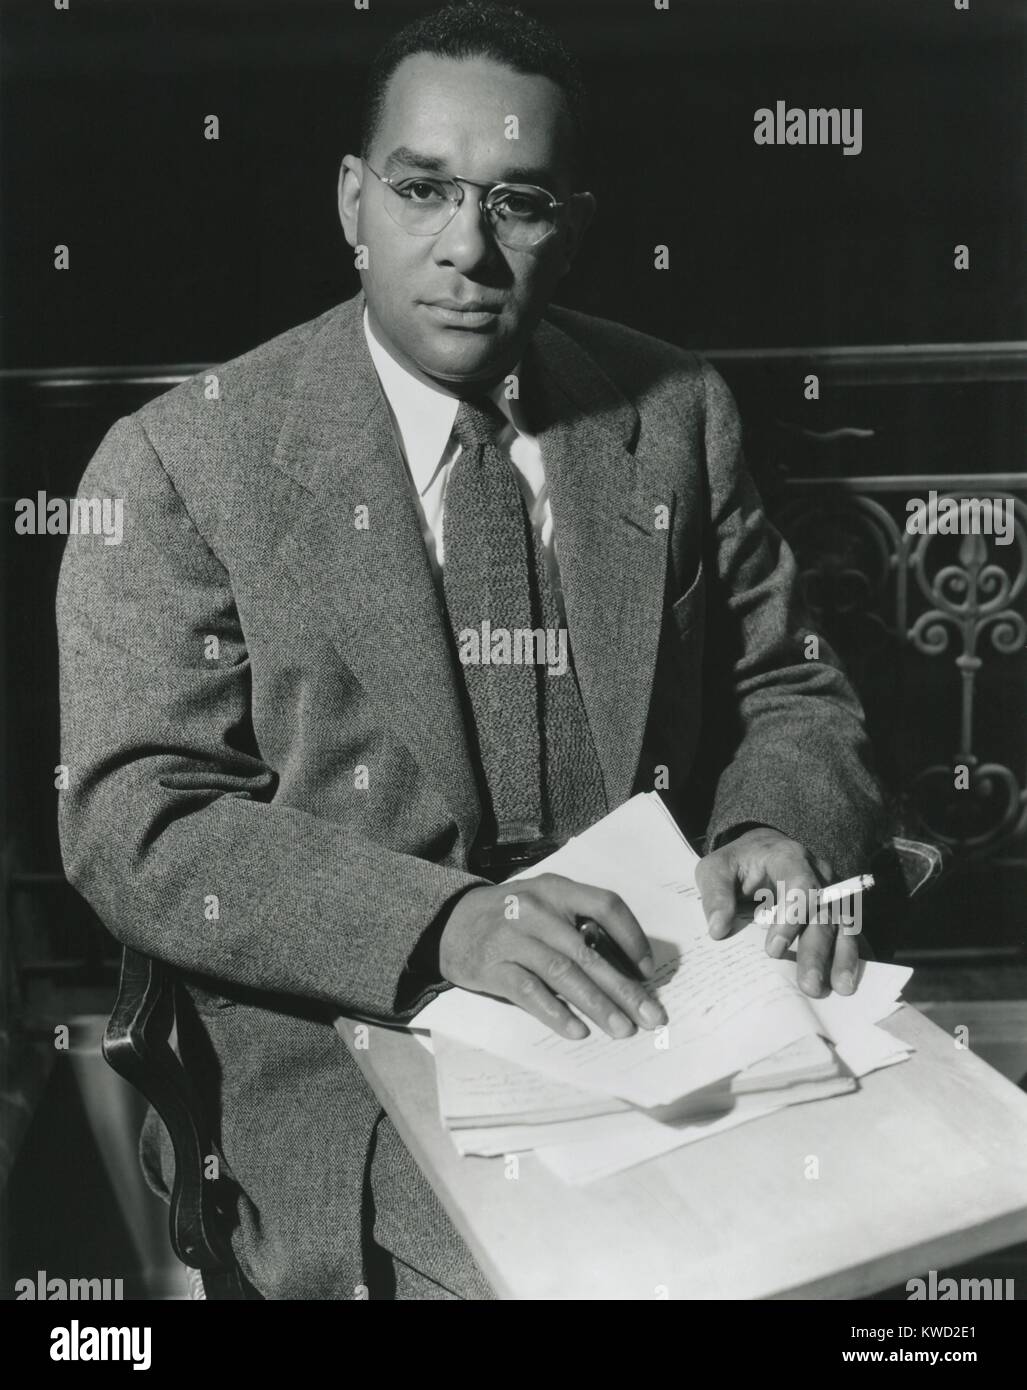 Richard Wright, was the author of NATIVE SON (1940), the first bestselling novel by African American. Photo taken in Paris, shortly after Wright moved there in 1947, never to return to the US and its racism  (BSLOC_2017_20_168) Stock Photo